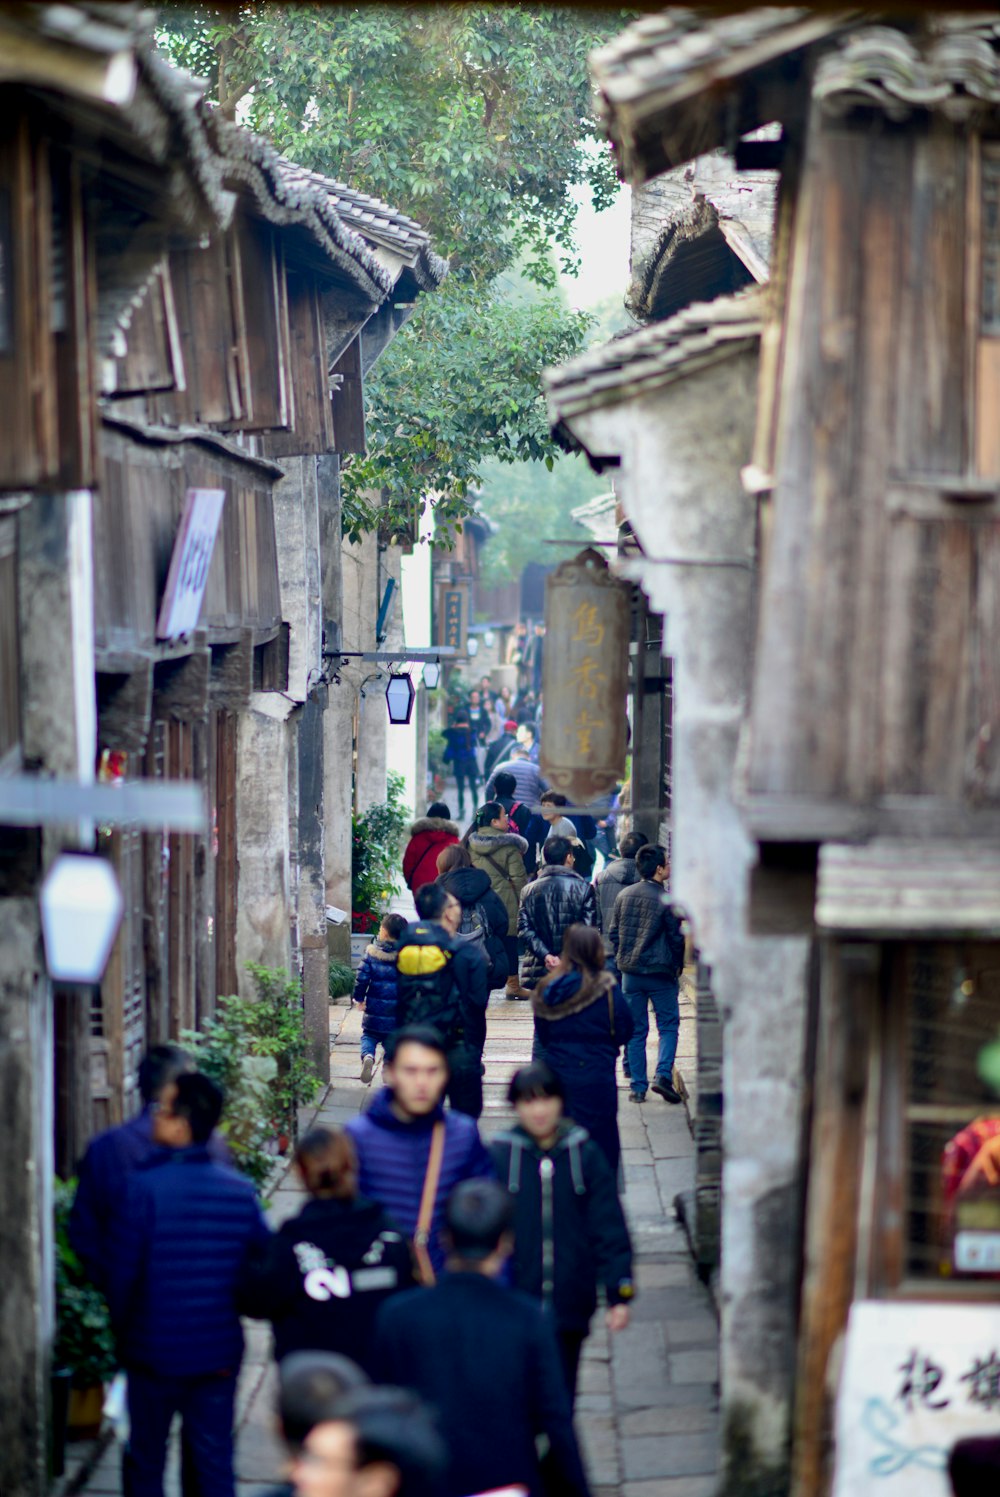 a group of people walking down a street next to wooden buildings